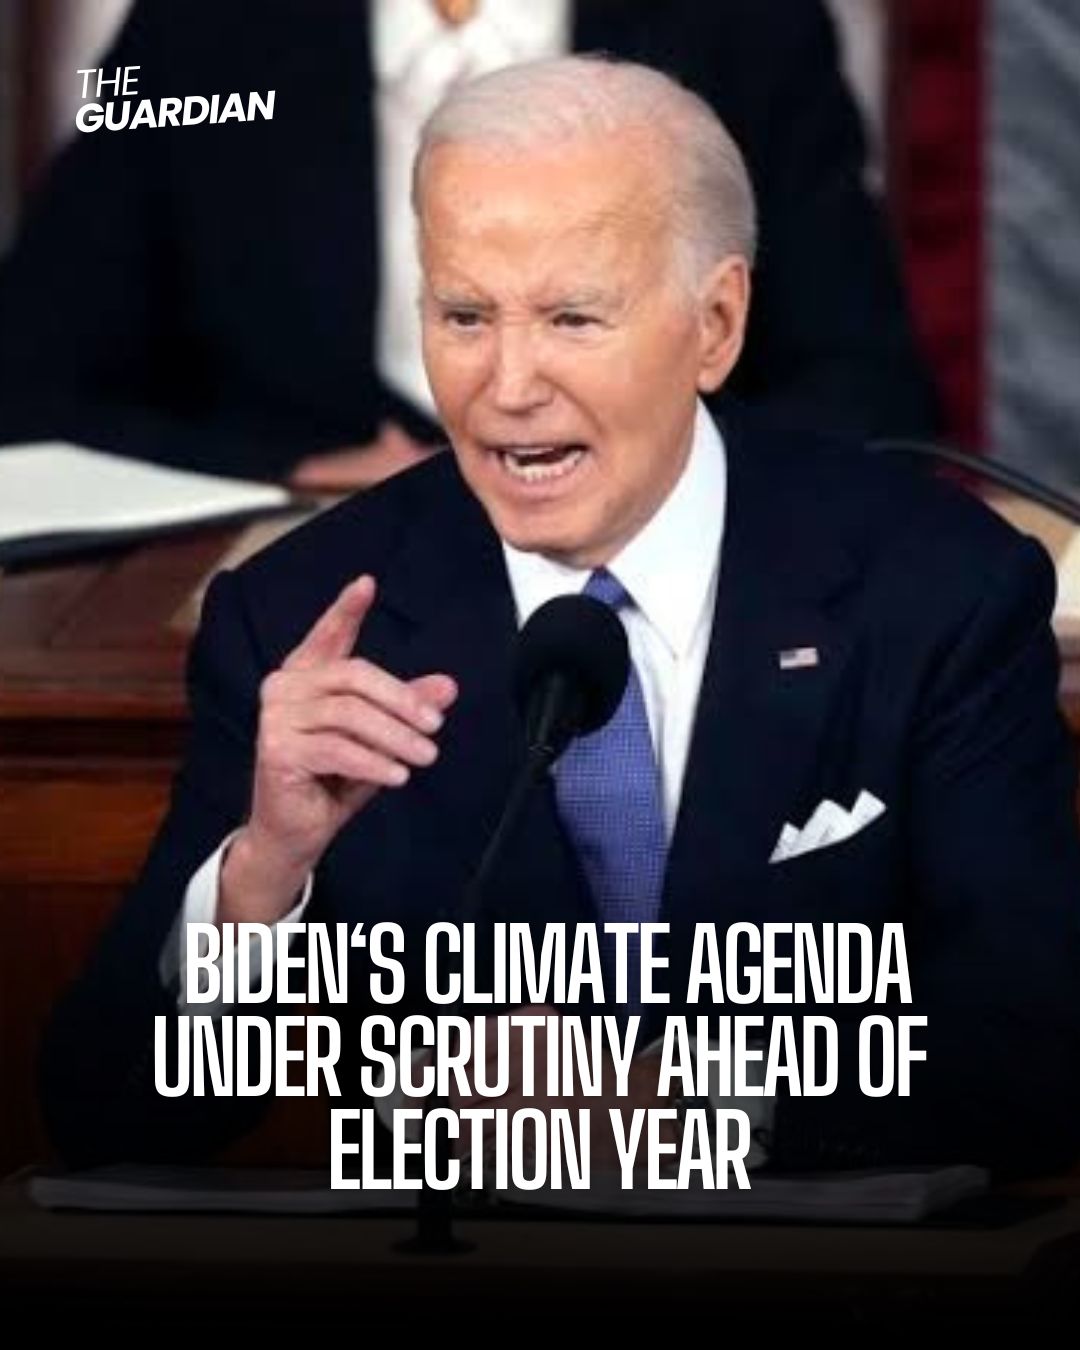 After delaying plans for pollution laws, Biden is trying to keep progressives onboard while demanding to swing state voters.